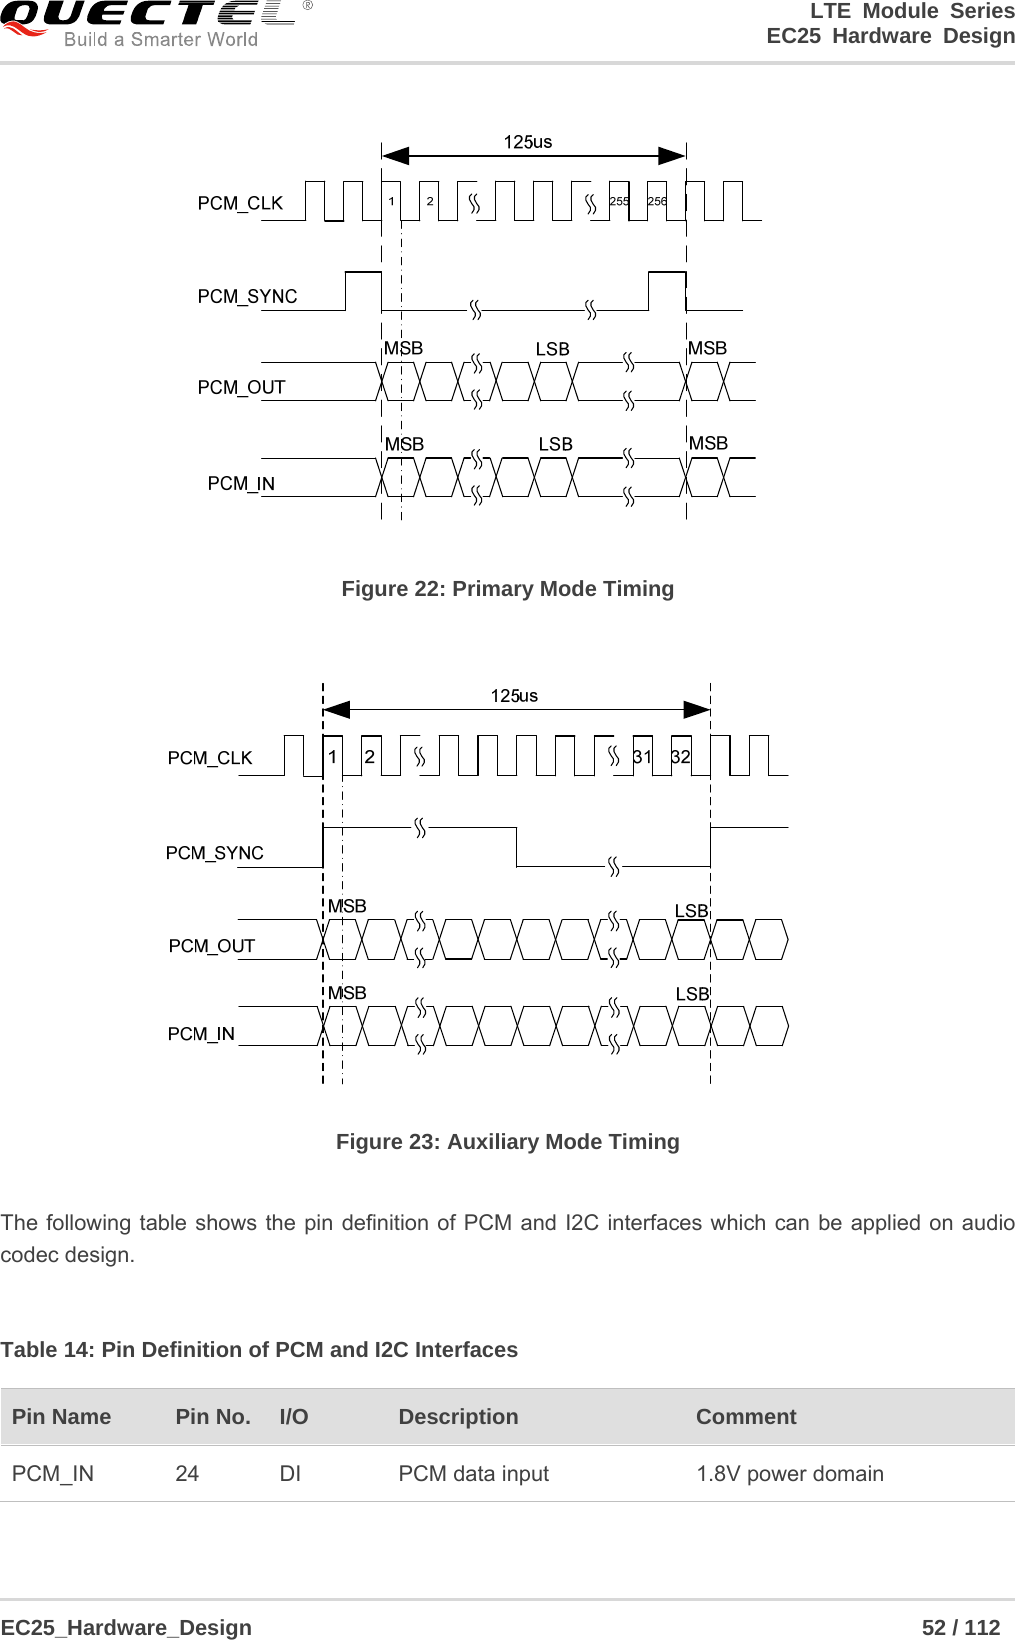 LTE Module Series                                                  EC25 Hardware Design  EC25_Hardware_Design                                                             52 / 112     Figure 22: Primary Mode Timing  Figure 23: Auxiliary Mode Timing  The following table shows the pin definition of PCM and I2C interfaces which can be applied on audio codec design.  Table 14: Pin Definition of PCM and I2C Interfaces Pin Name    Pin No.  I/O  Description   Comment PCM_IN  24  DI  PCM data input  1.8V power domain 